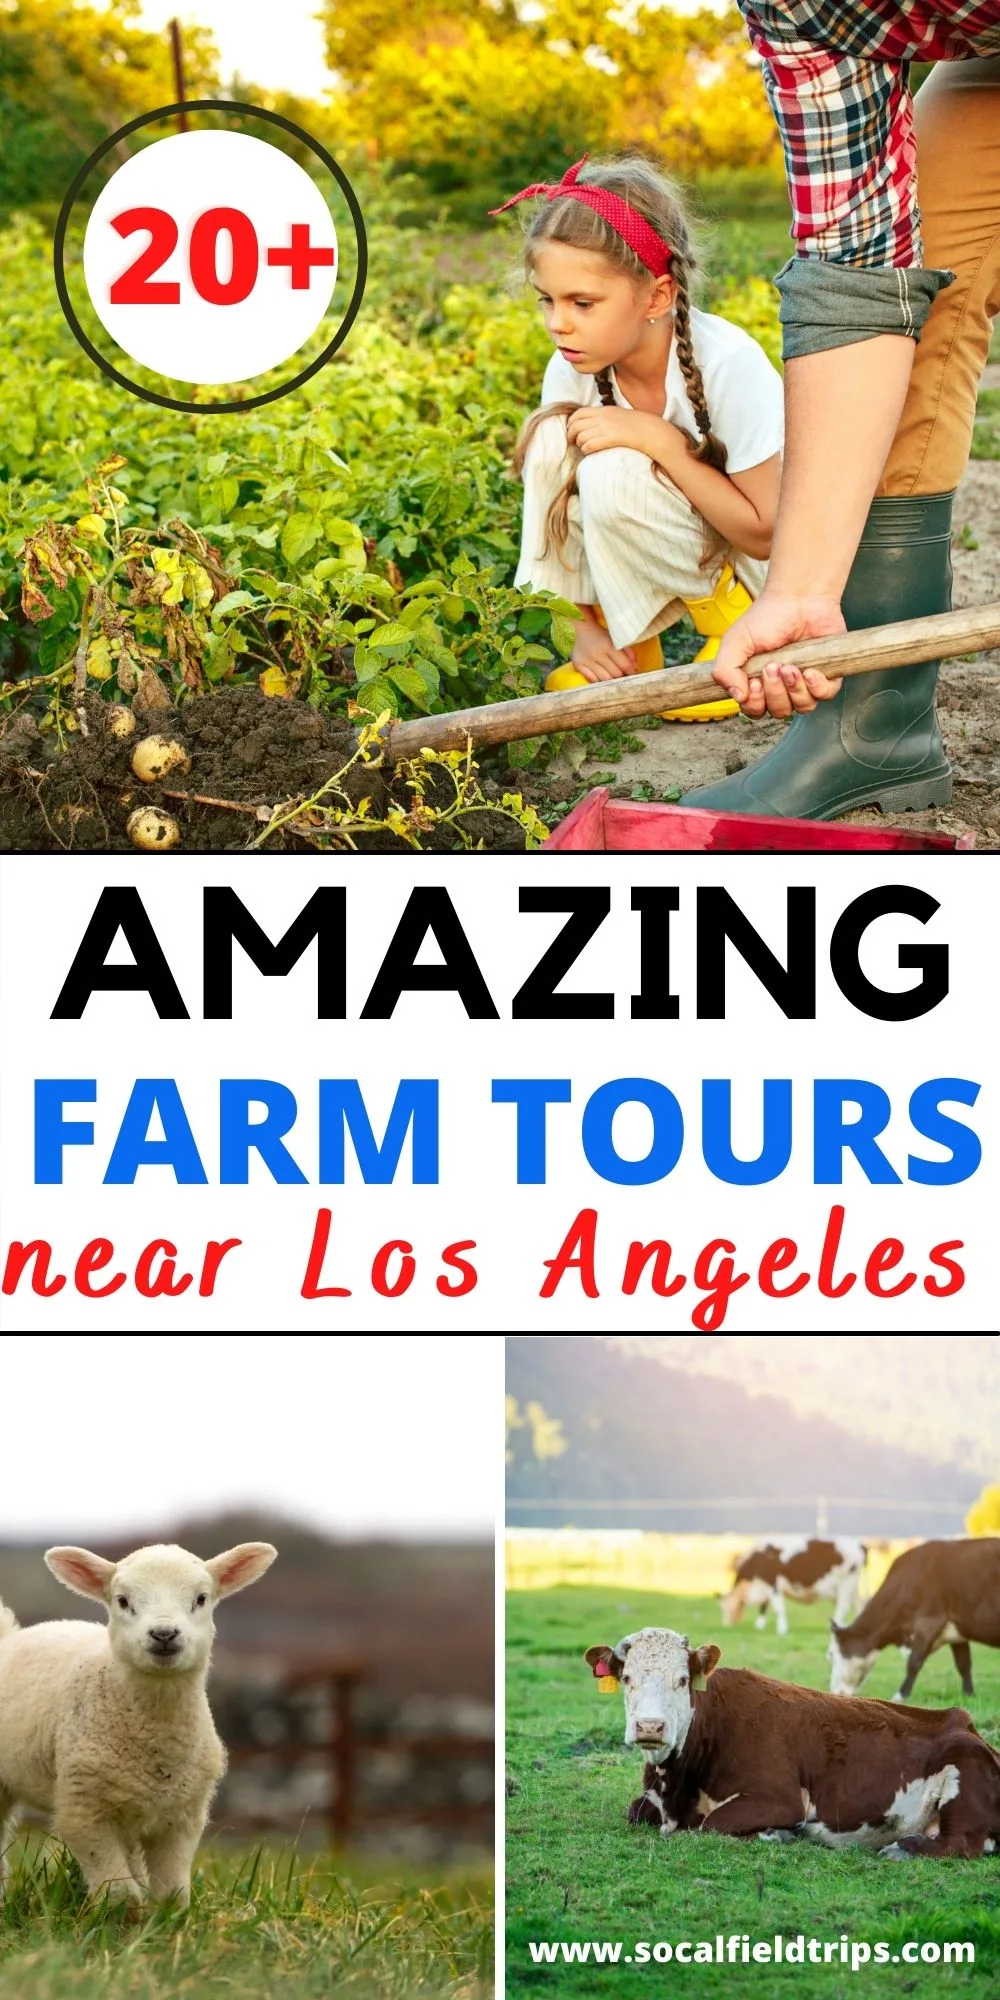 Check out this list of the best family farms near Los Angeles including Ventura, Orange, San Diego, Riverside and Santa Barbara Counties. This is an opportunity for students to learn about a real working farm in their local area.